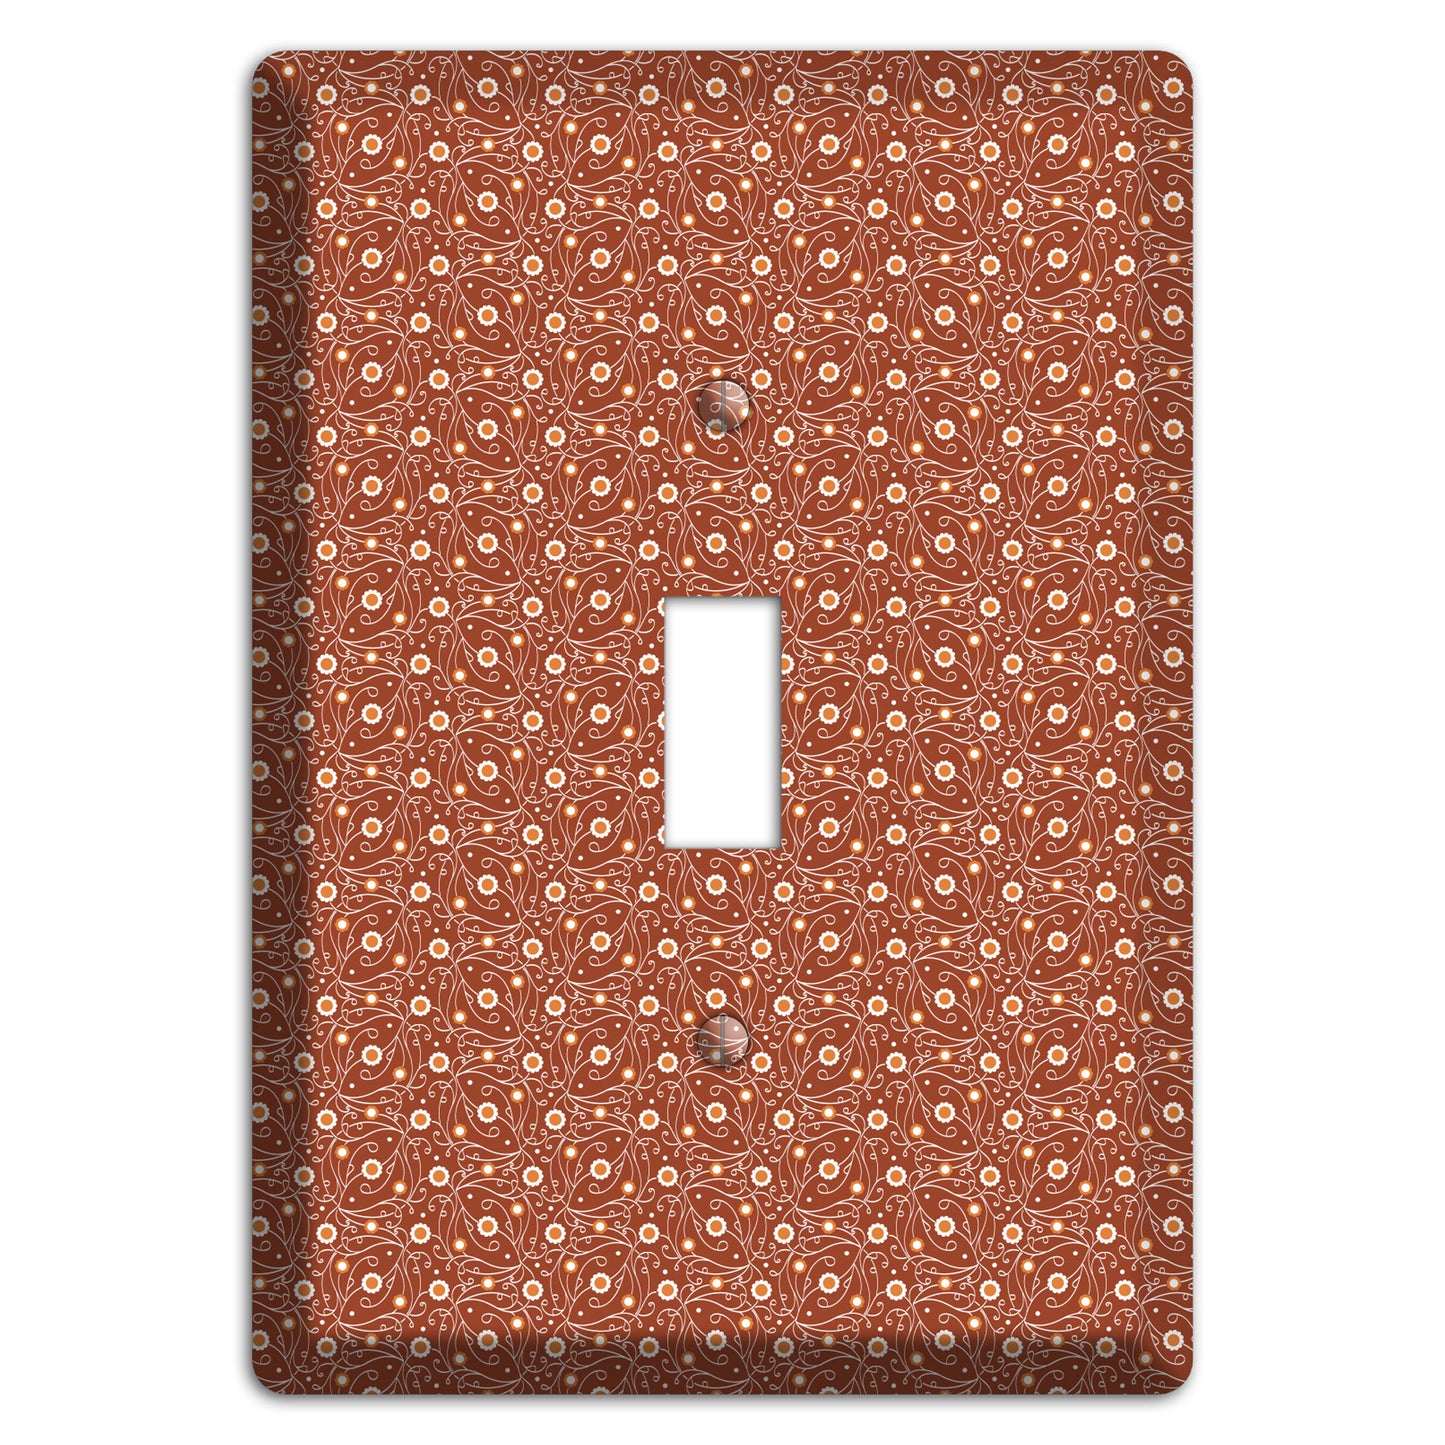 Tiny Brown Vine Floral Cover Plates